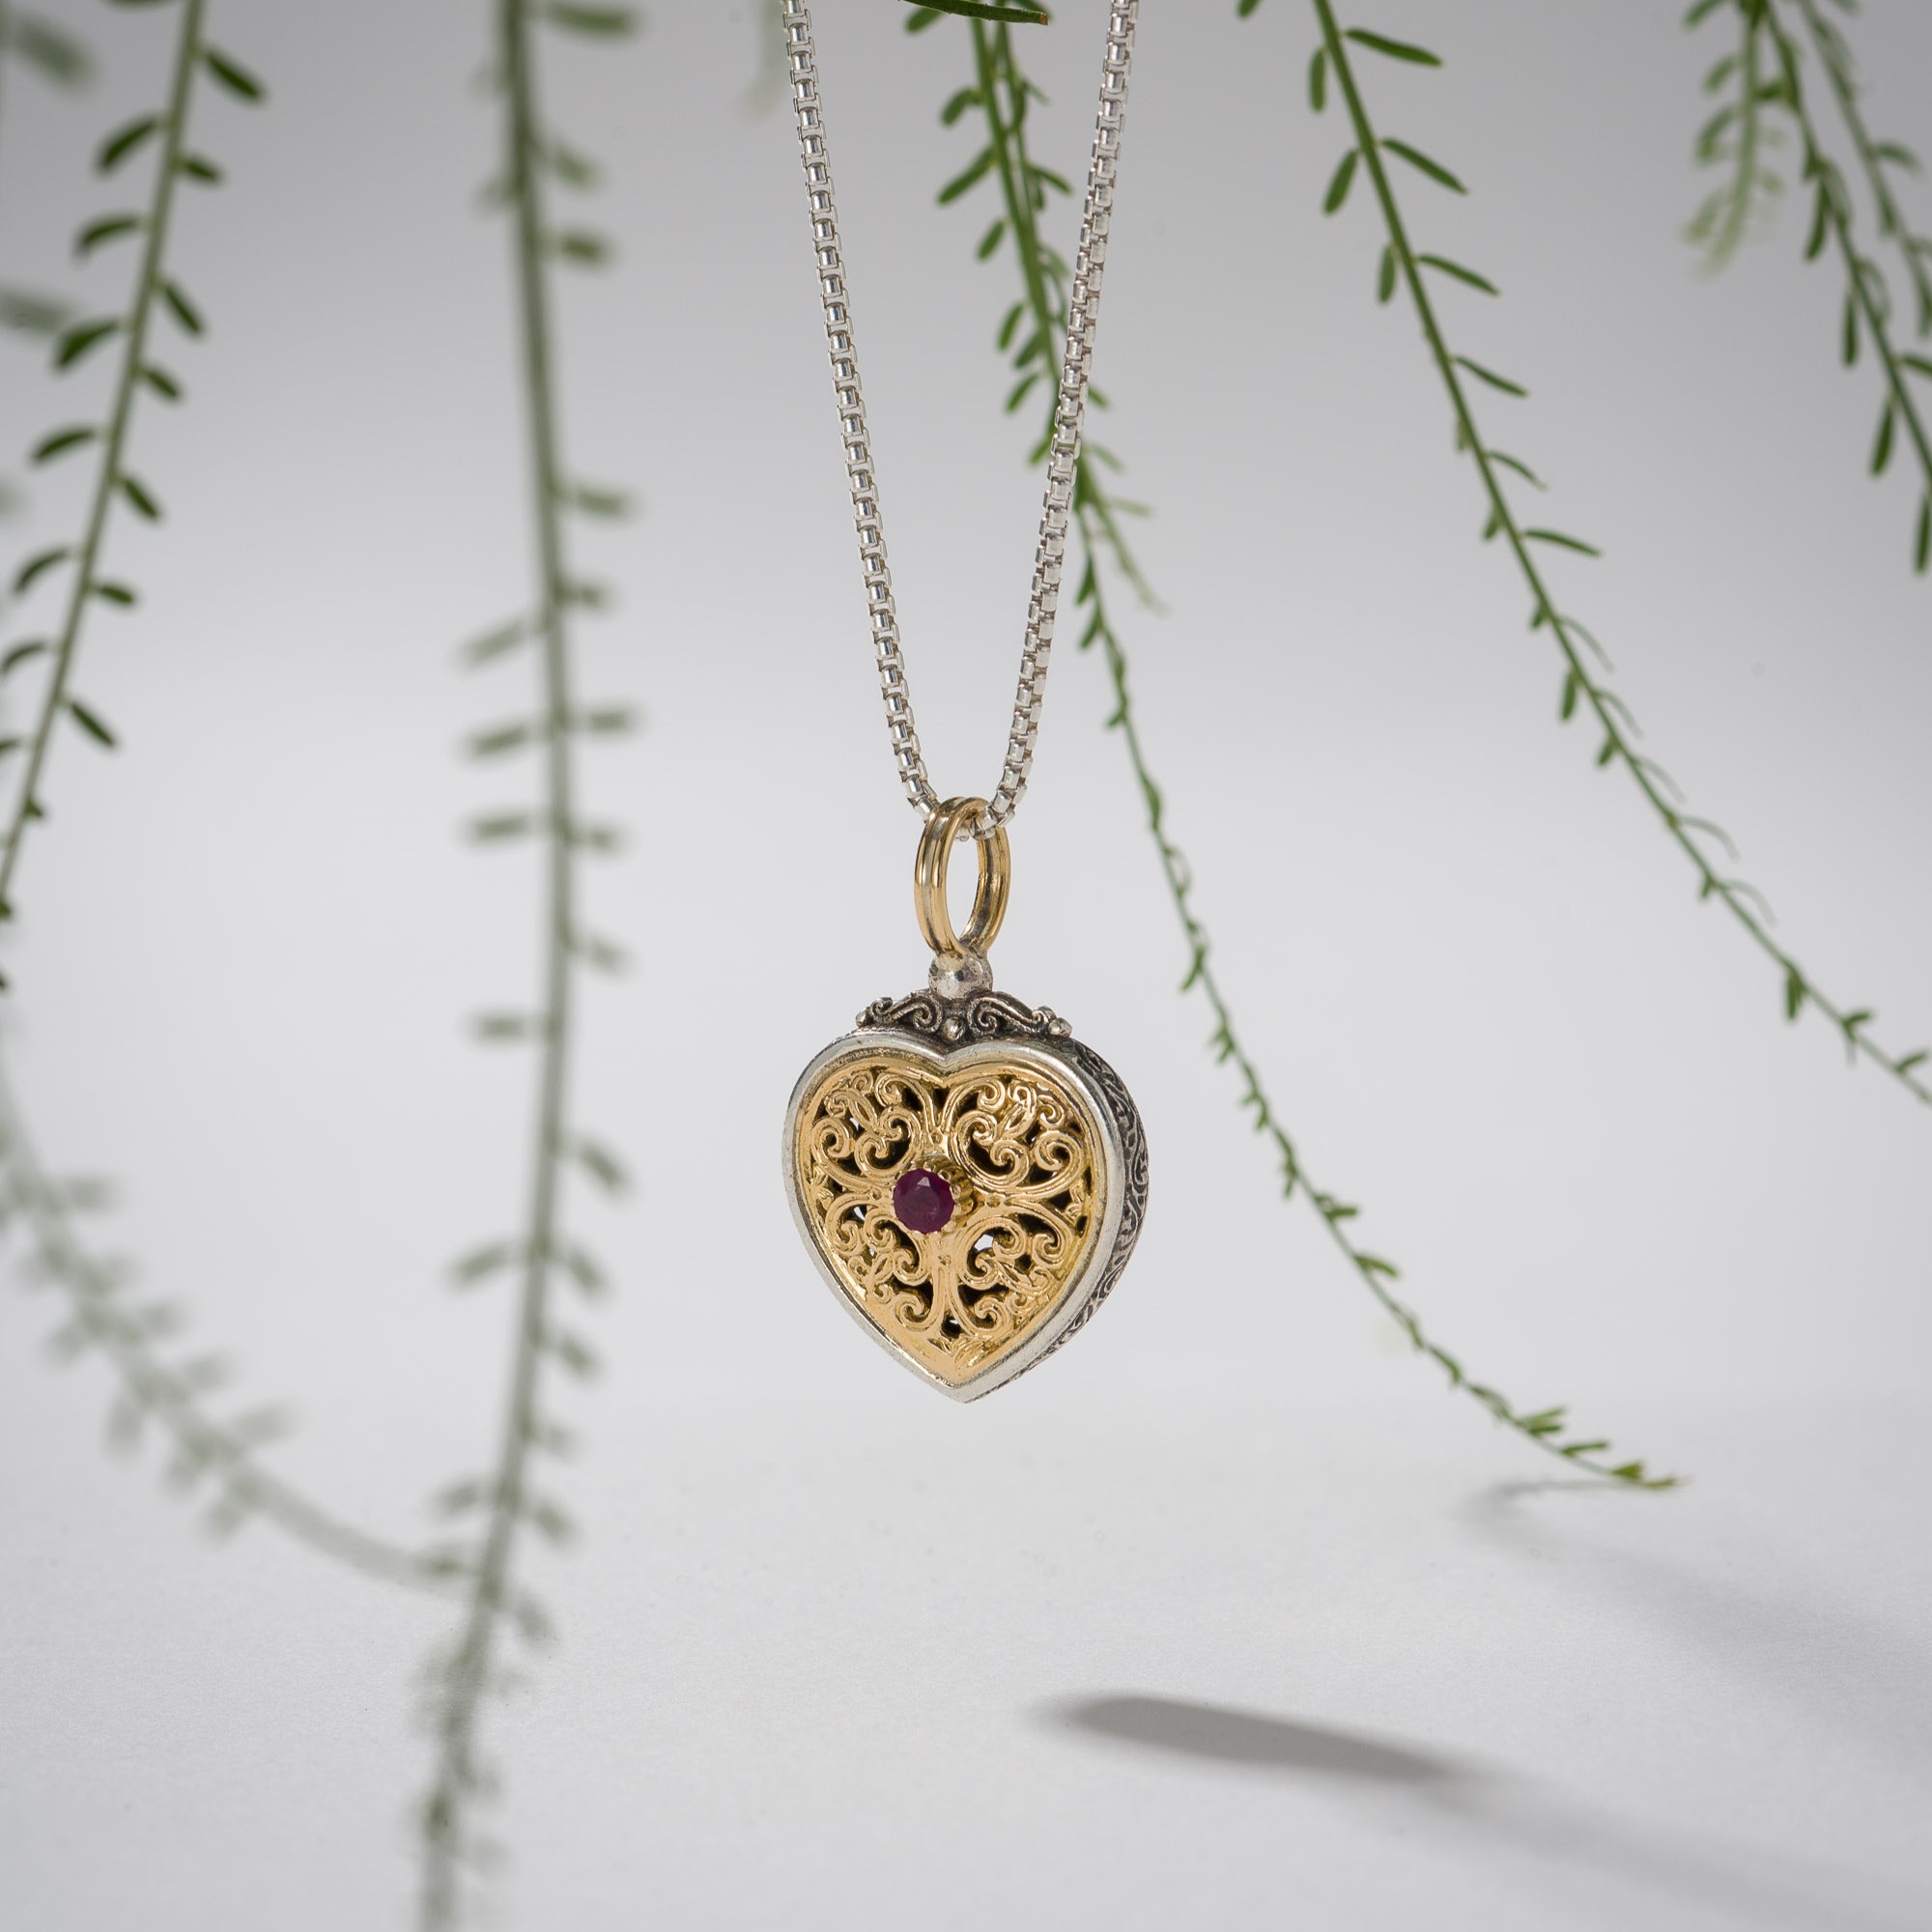 Mediterranean Heart Pendant in 18K Gold and Sterling Silver with Precious stone